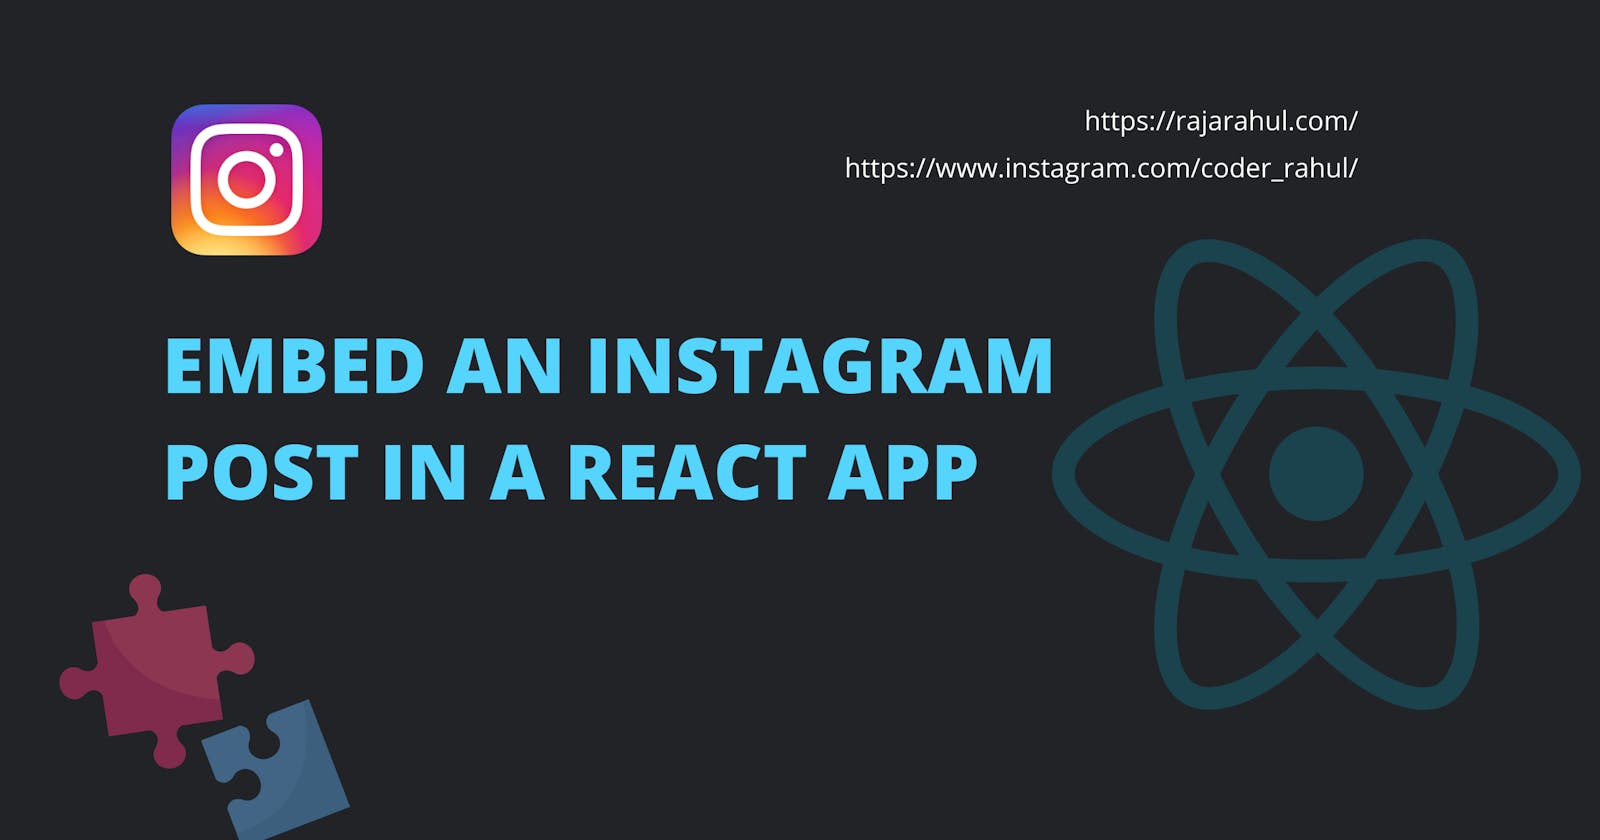 Embed an Instagram post in a React App